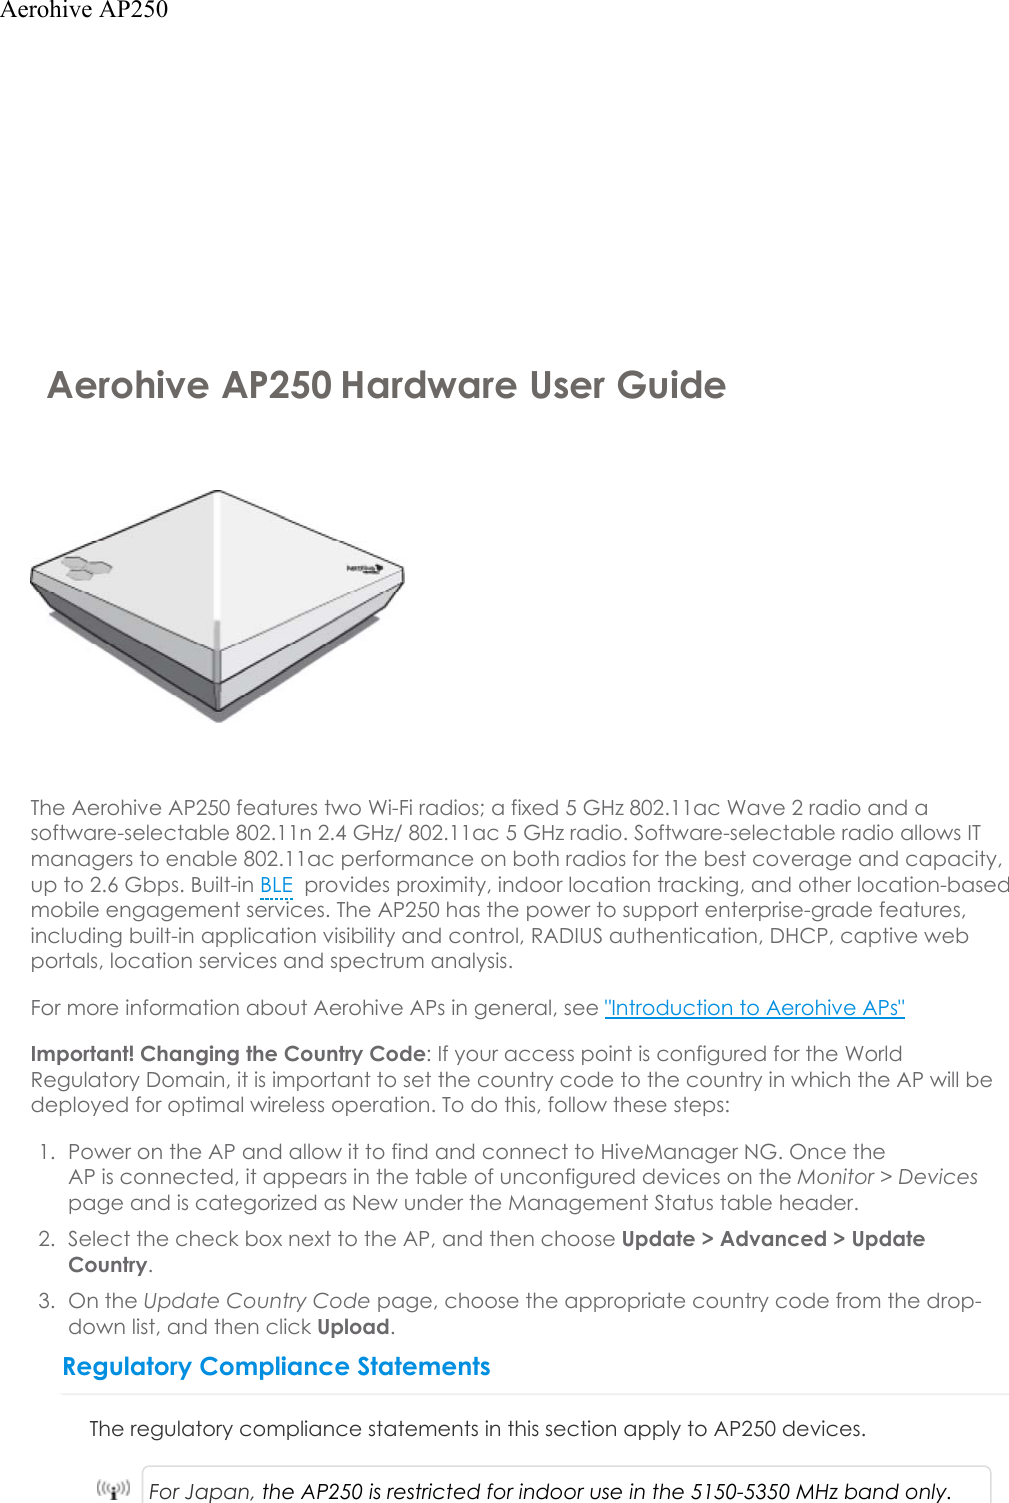 Aerohive AP250 Hardware User GuideThe Aerohive AP250 features two Wi-Fi radios; a fixed 5 GHz 802.11ac Wave 2 radio and a software-selectable 802.11n 2.4 GHz/ 802.11ac 5 GHz radio. Software-selectable radio allows IT managers to enable 802.11ac performance on both radios for the best coverage and capacity, up to 2.6 Gbps. Built-in BLE provides proximity, indoor location tracking, and other location-based mobile engagement services. The AP250 has the power to support enterprise-grade features, including built-in application visibility and control, RADIUS authentication, DHCP, captive web portals, location services and spectrum analysis. For more information about Aerohive APs in general, see &quot;Introduction to Aerohive APs&quot;Important! Changing the Country Code: If your access point is configured for the World Regulatory Domain, it is important to set the country code to the country in which the APwill be deployed for optimal wireless operation. To do this, follow these steps:1. Power on the APand allow it to find and connect to HiveManager NG. Once theAPisconnected, it appears in the table of unconfigured devices on the Monitor &gt; Devicespage and is categorized as New under the Management Status table header.2. Select the check box next to the AP, and then choose Update &gt; Advanced &gt;UpdateCountry.3. On the Update Country Code page, choose the appropriate country code from the drop-down list, and then click Upload.Regulatory Compliance StatementsThe regulatory compliance statements in this section apply to AP250 devices.For Japan, the AP250 is restricted for indoor use in the 5150-5350 MHz band only.Aerohive AP250